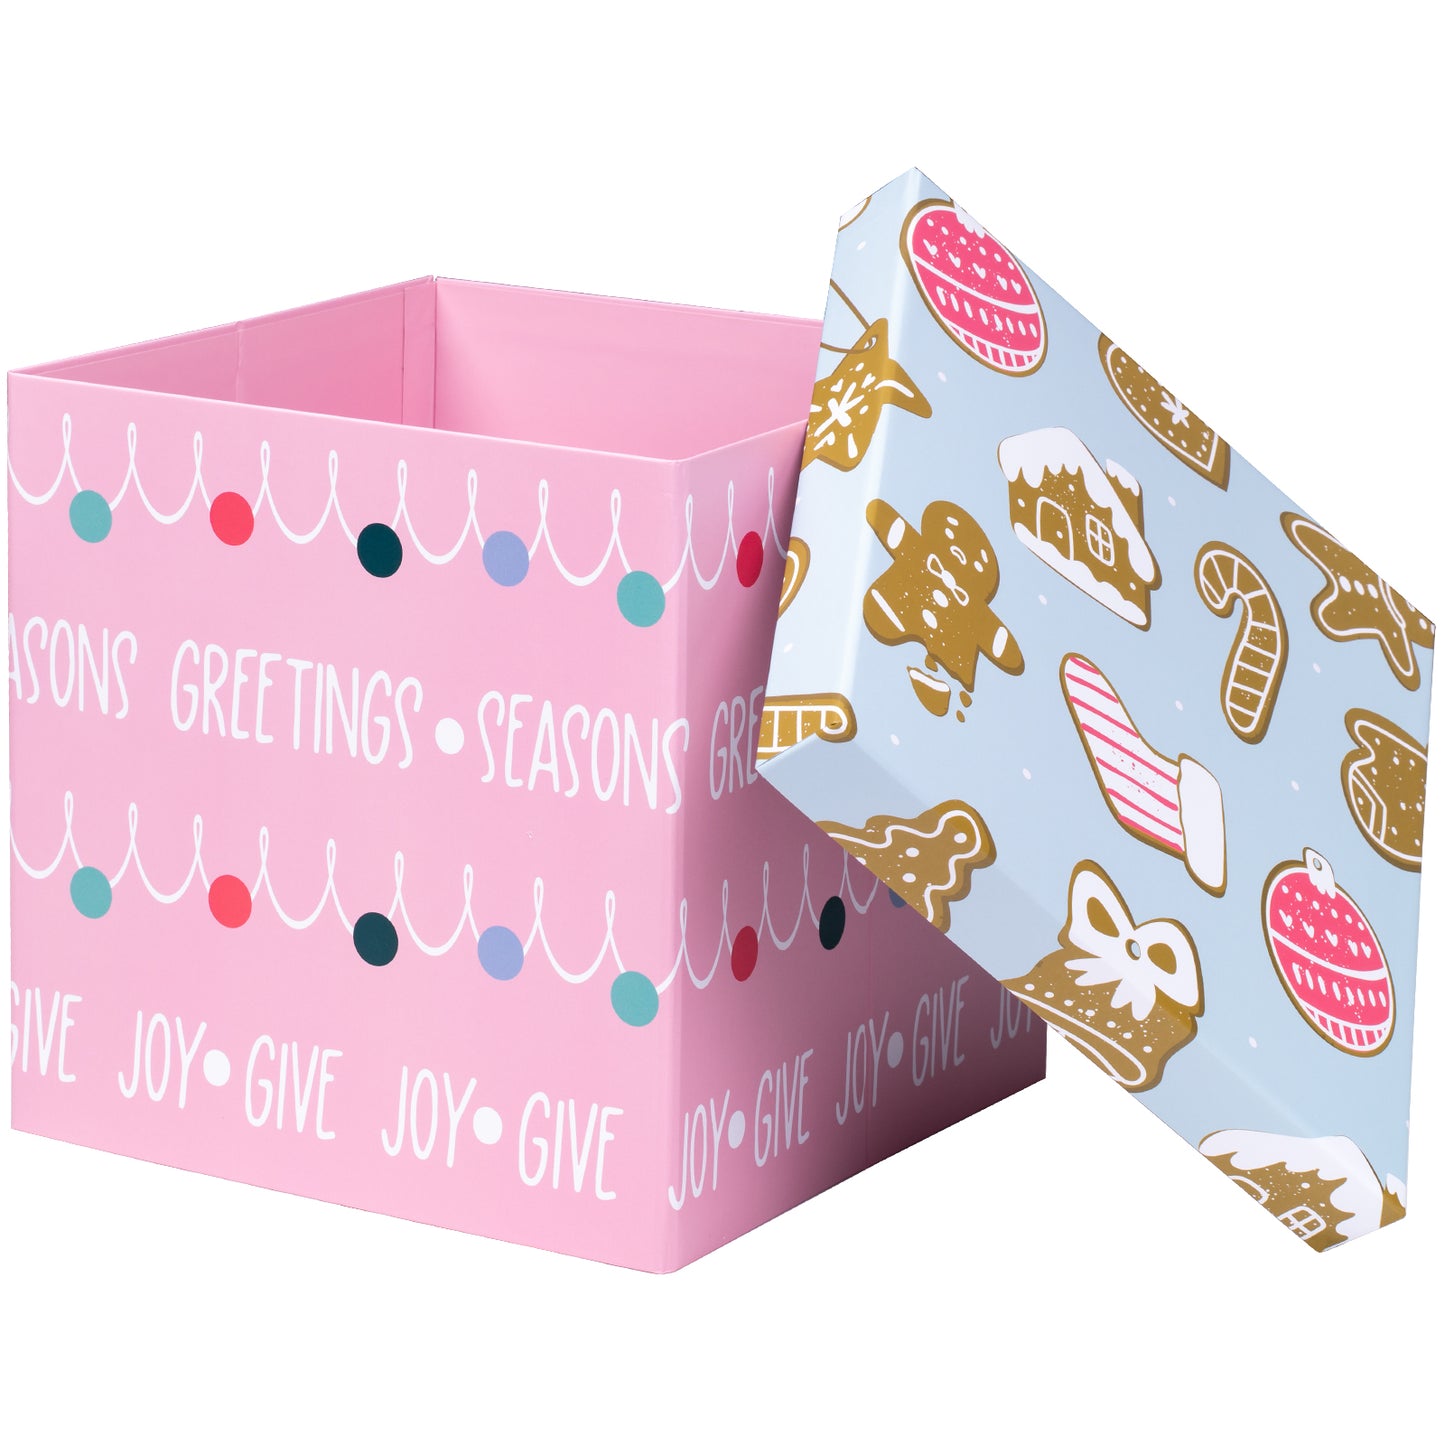 WRAPLA 23X23X23CM Christmas Gift Box with Lid Pink and Blue design for Party, Wedding, Gift Wrap, Bridesmaid Proposal, Storage